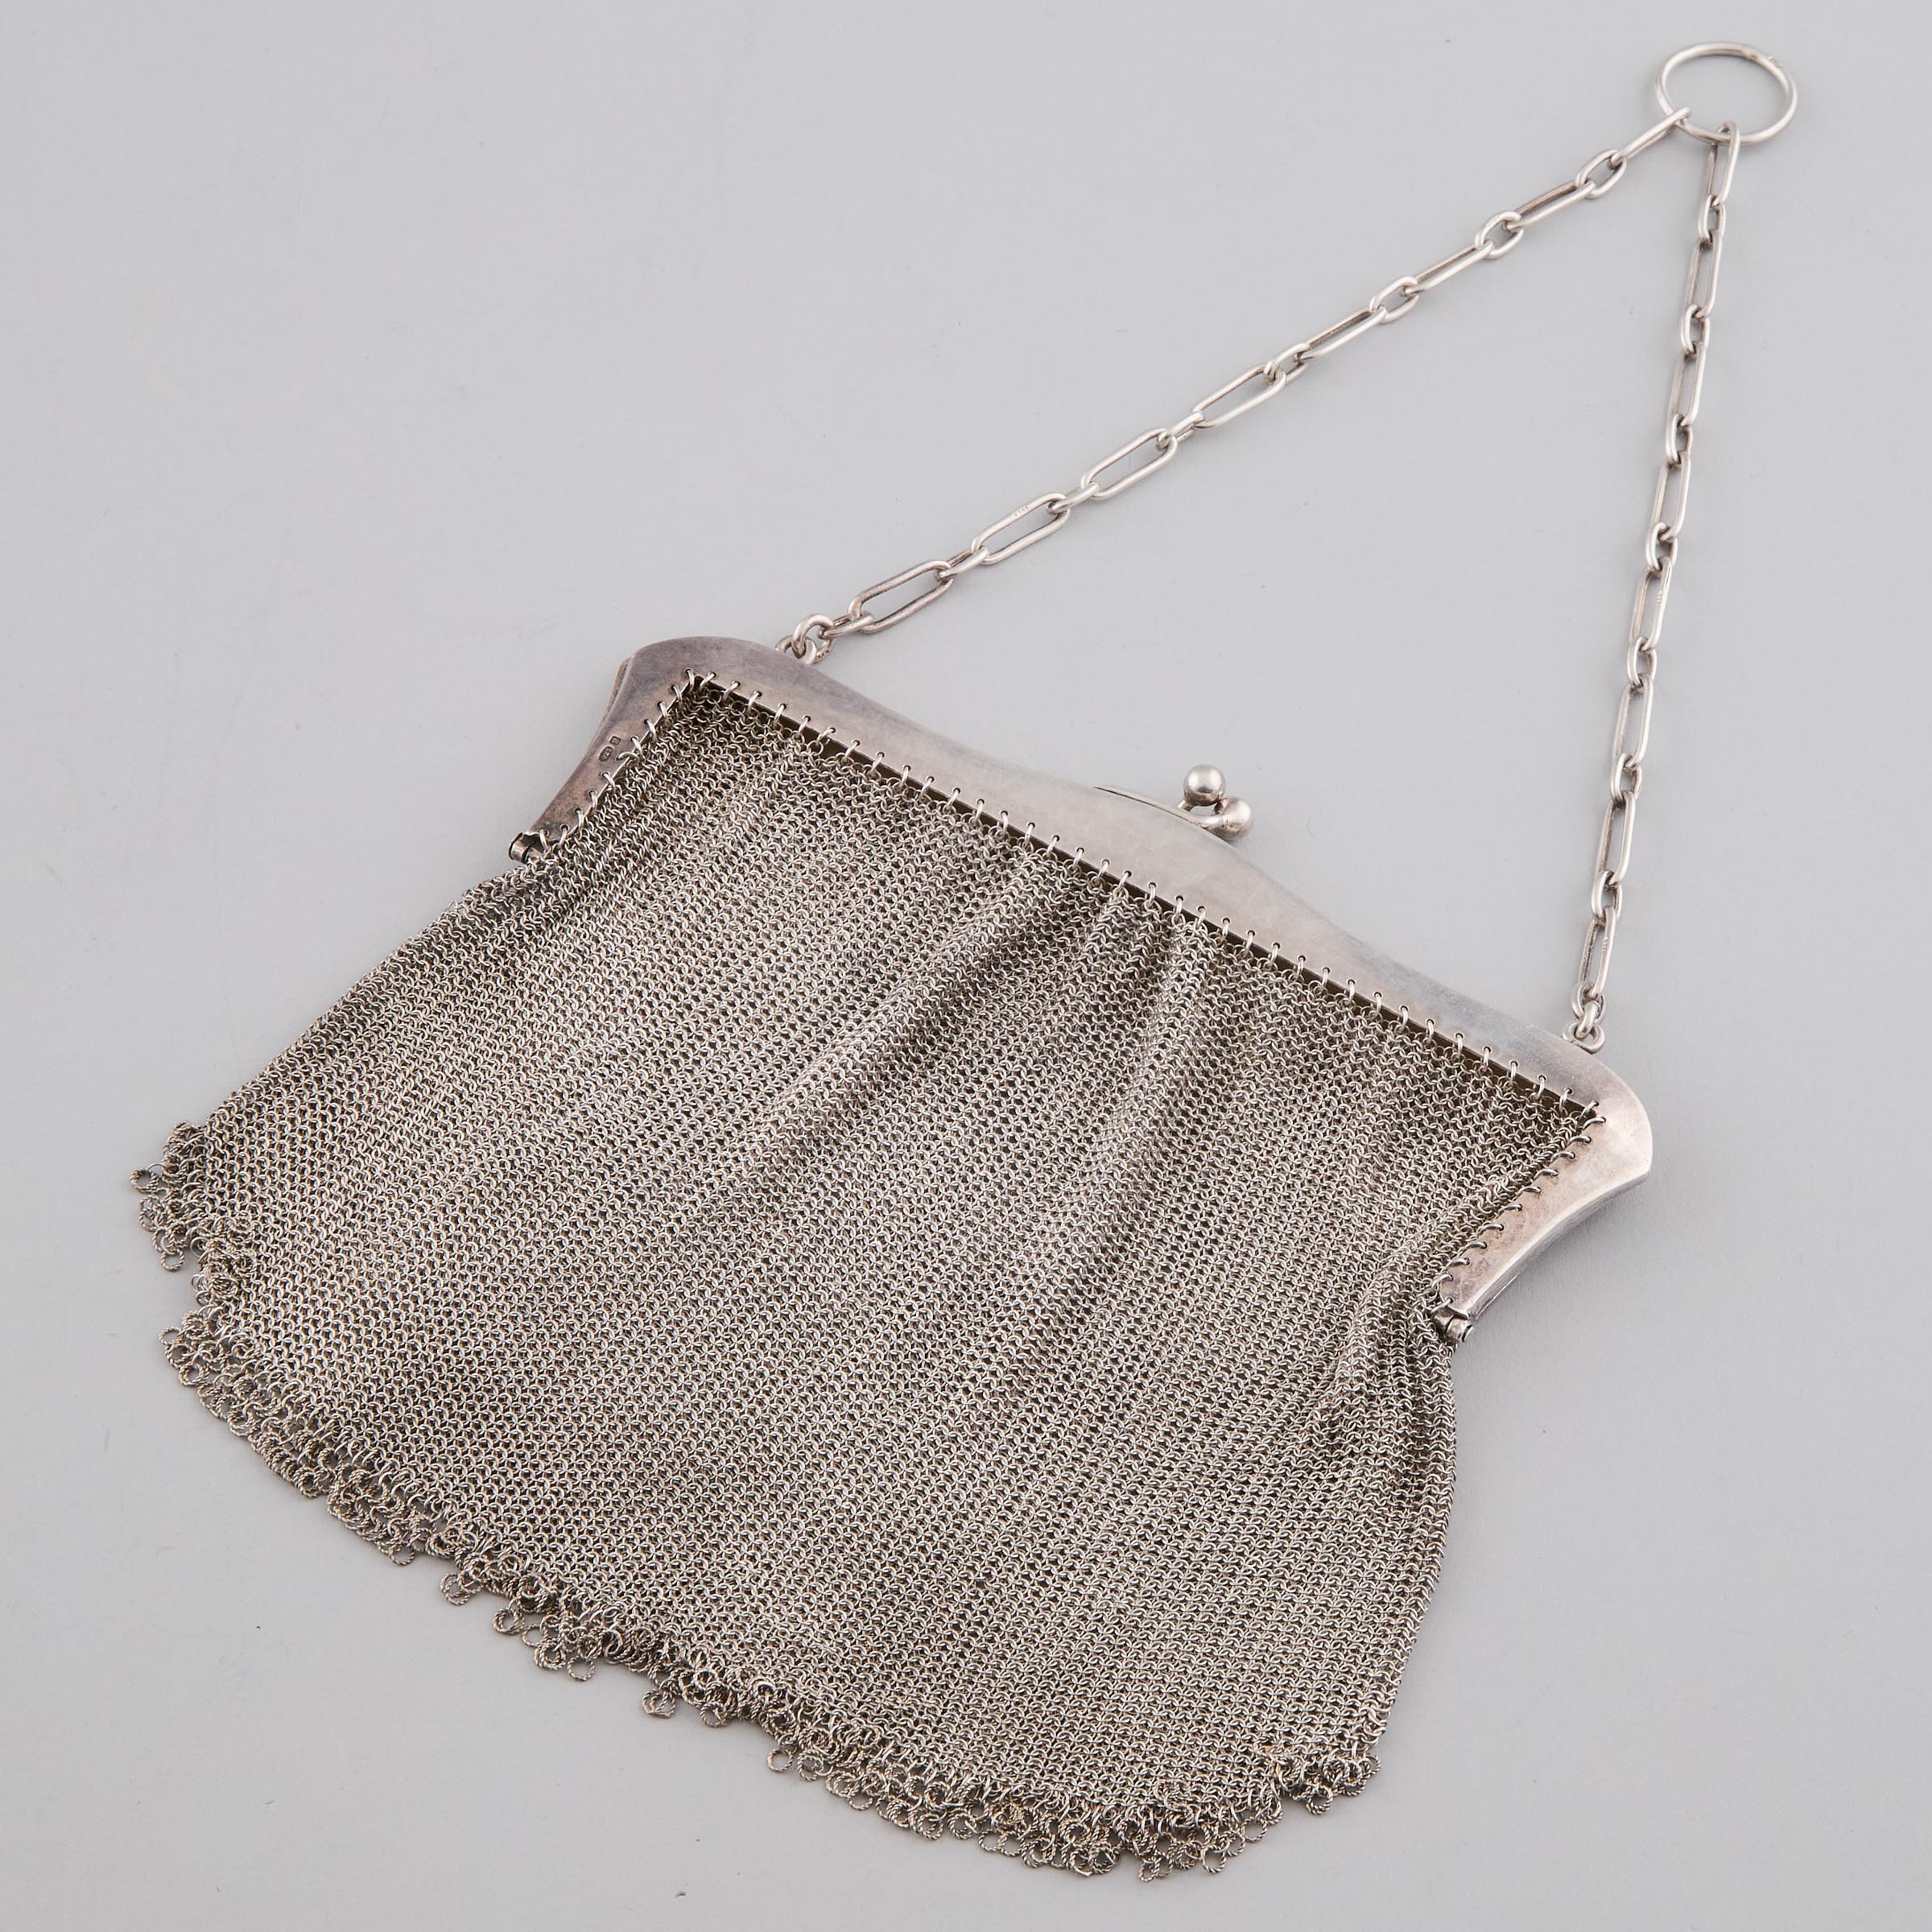 Continental Silver Mesh Purse, early